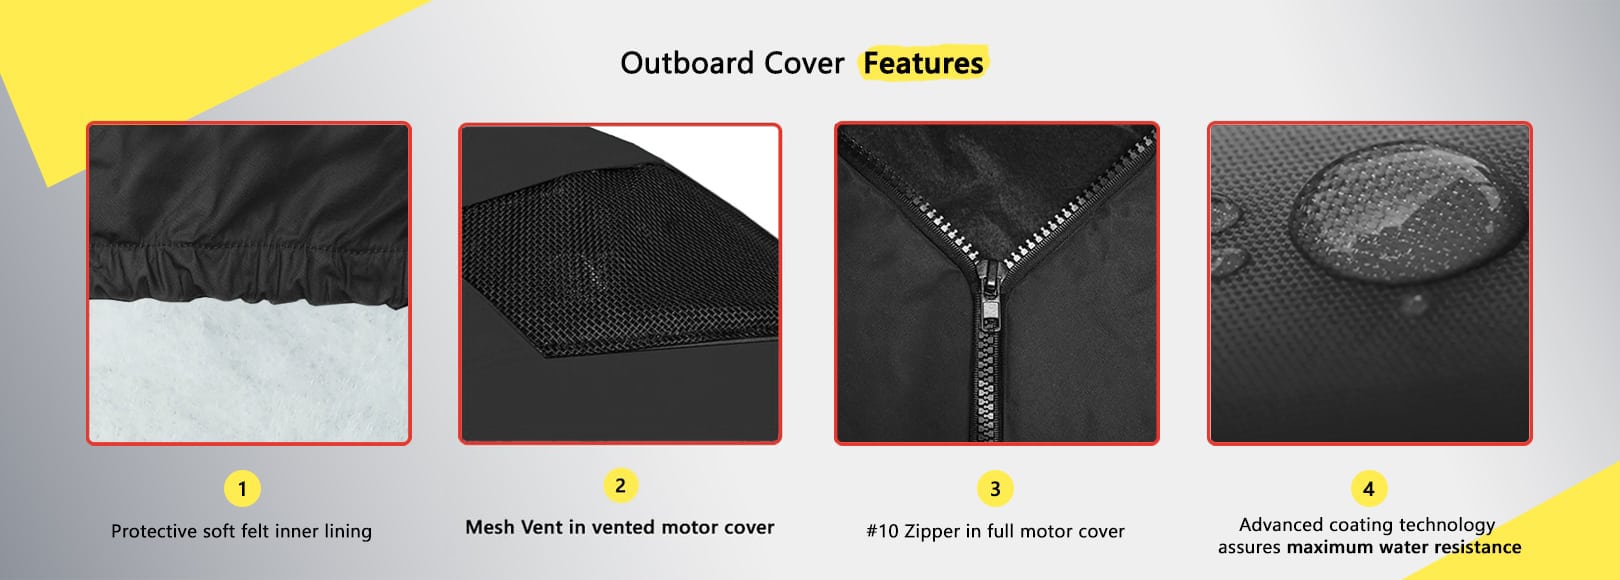 Outboard Motor Cover Features